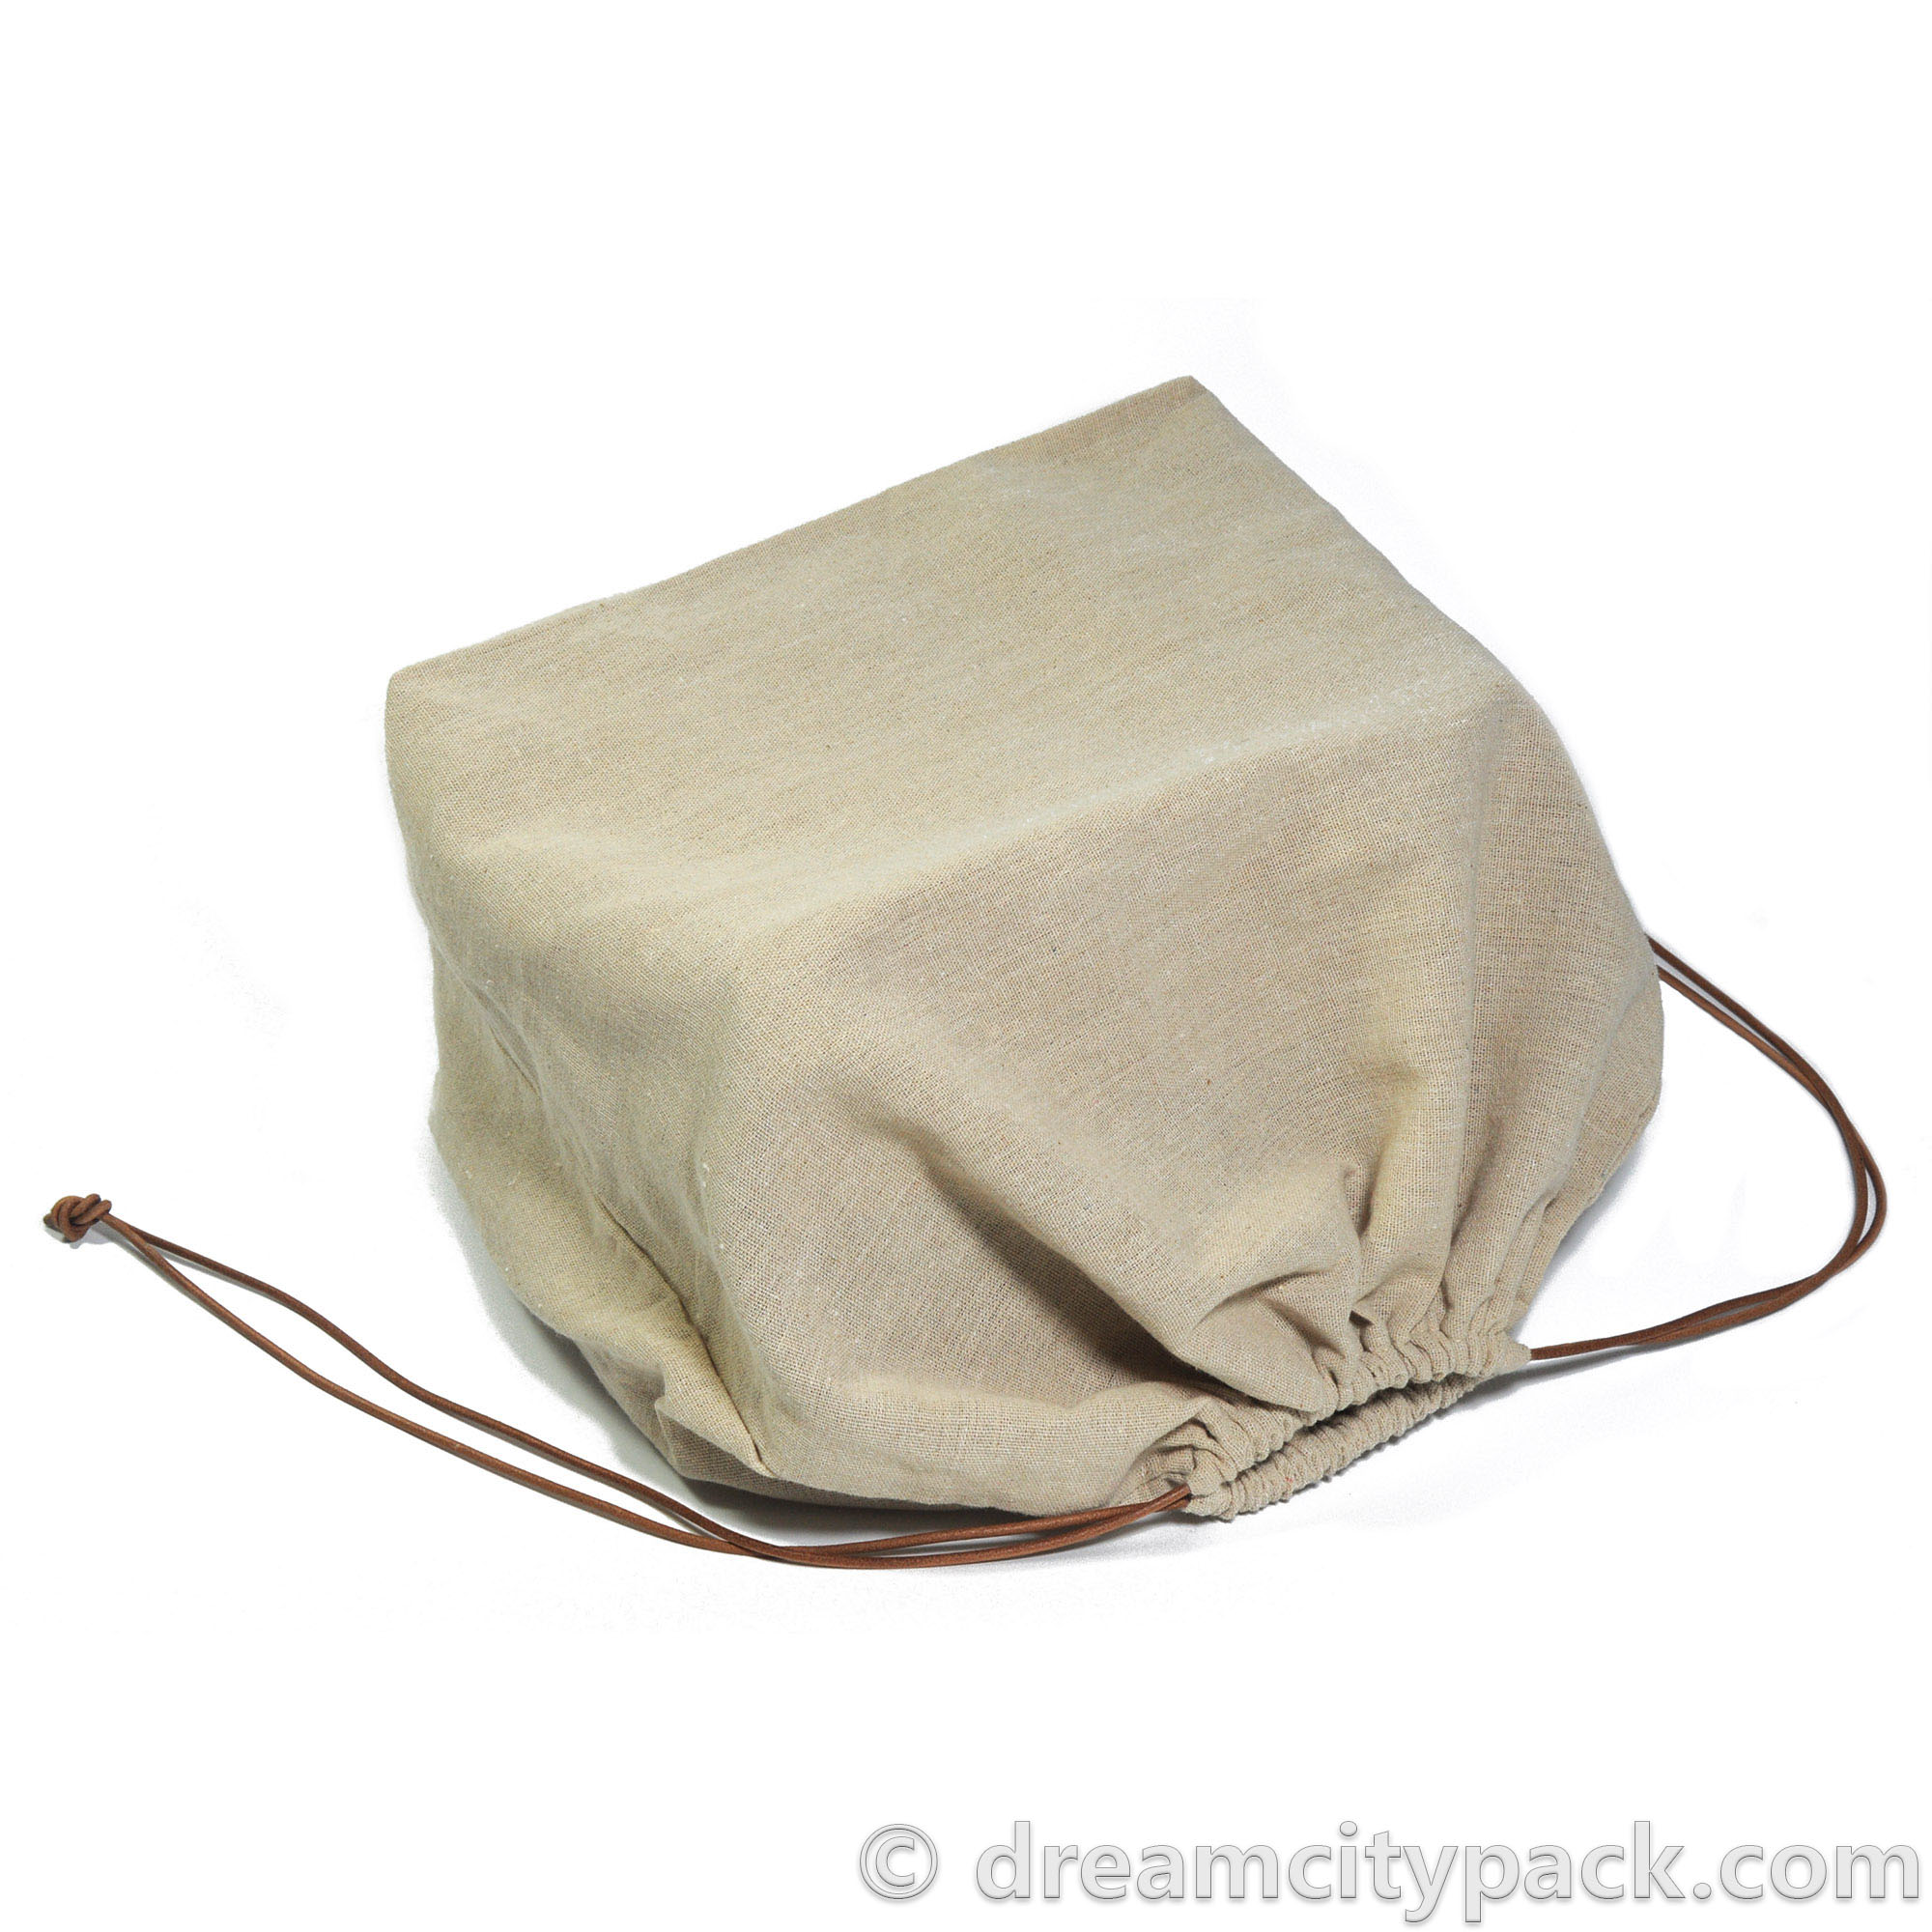 Drawstring Dust Bag for Handbags (Available in 3 Sizes)